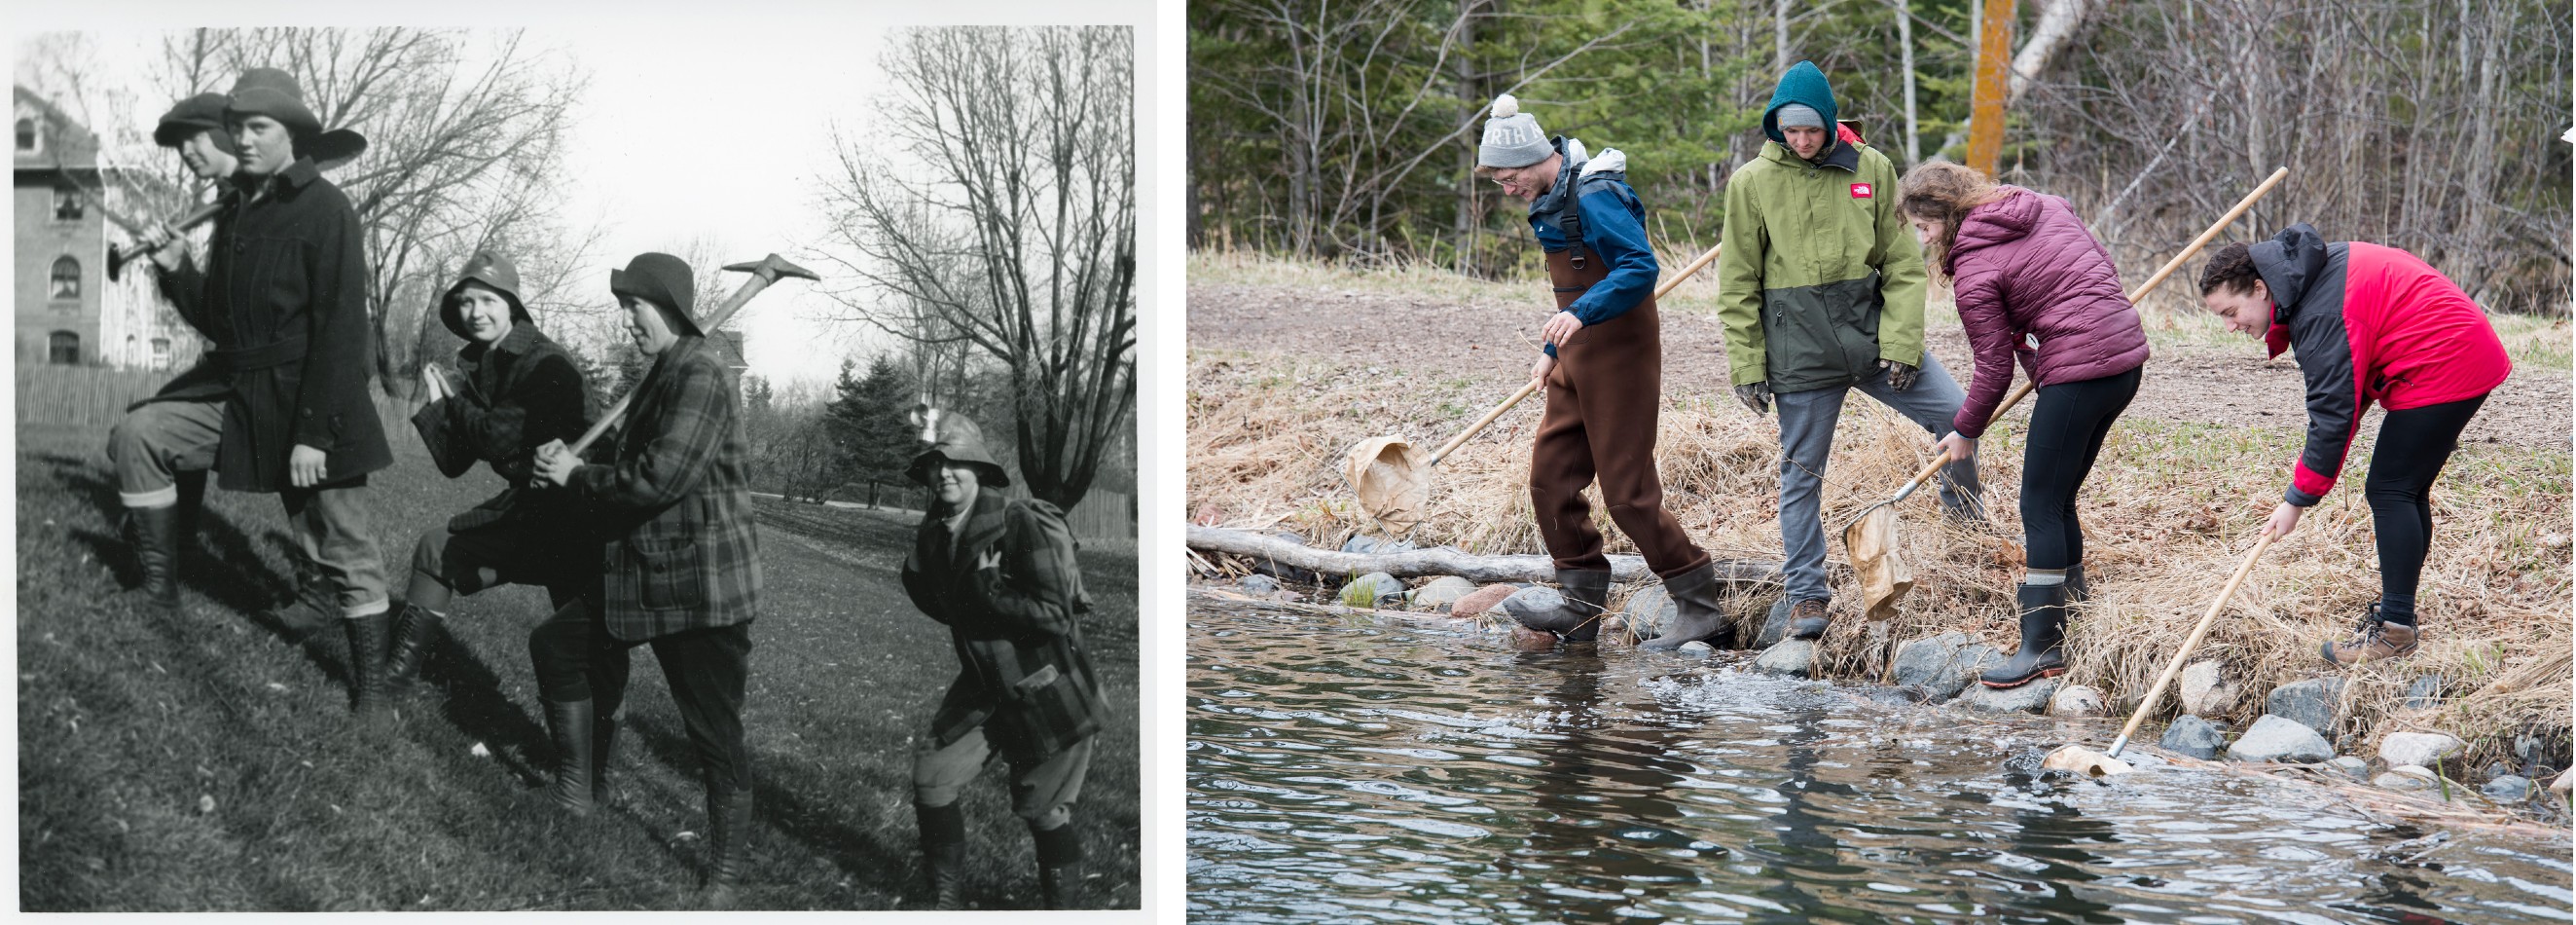 Two photos side by side of students working outdoors, one in the 1940s and one in the present day.